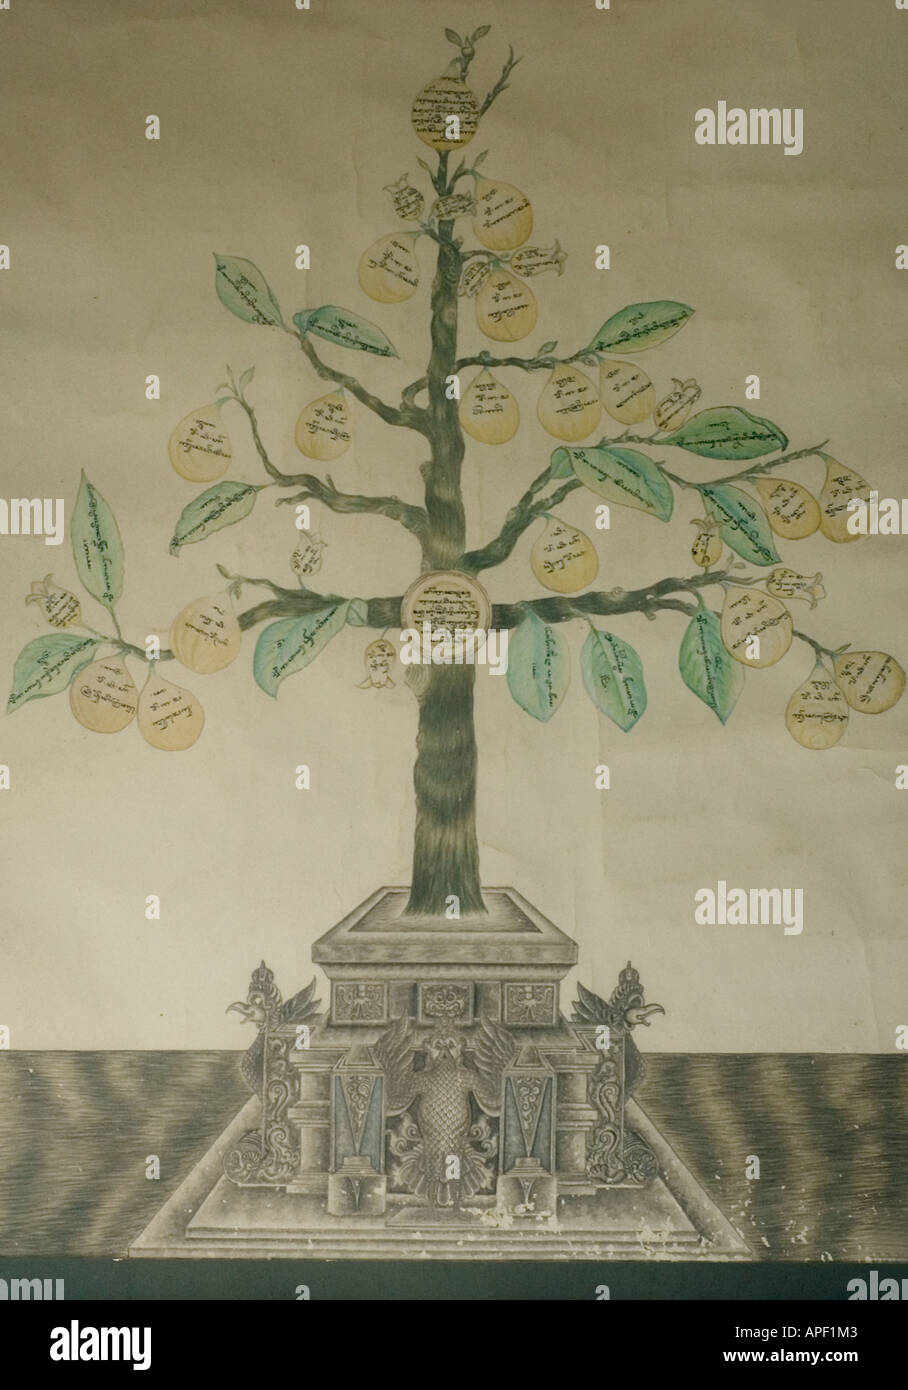 A poster showing the family tree of the Royal family of the Sultan of Jogjakarta in Indonesia Stock Photo